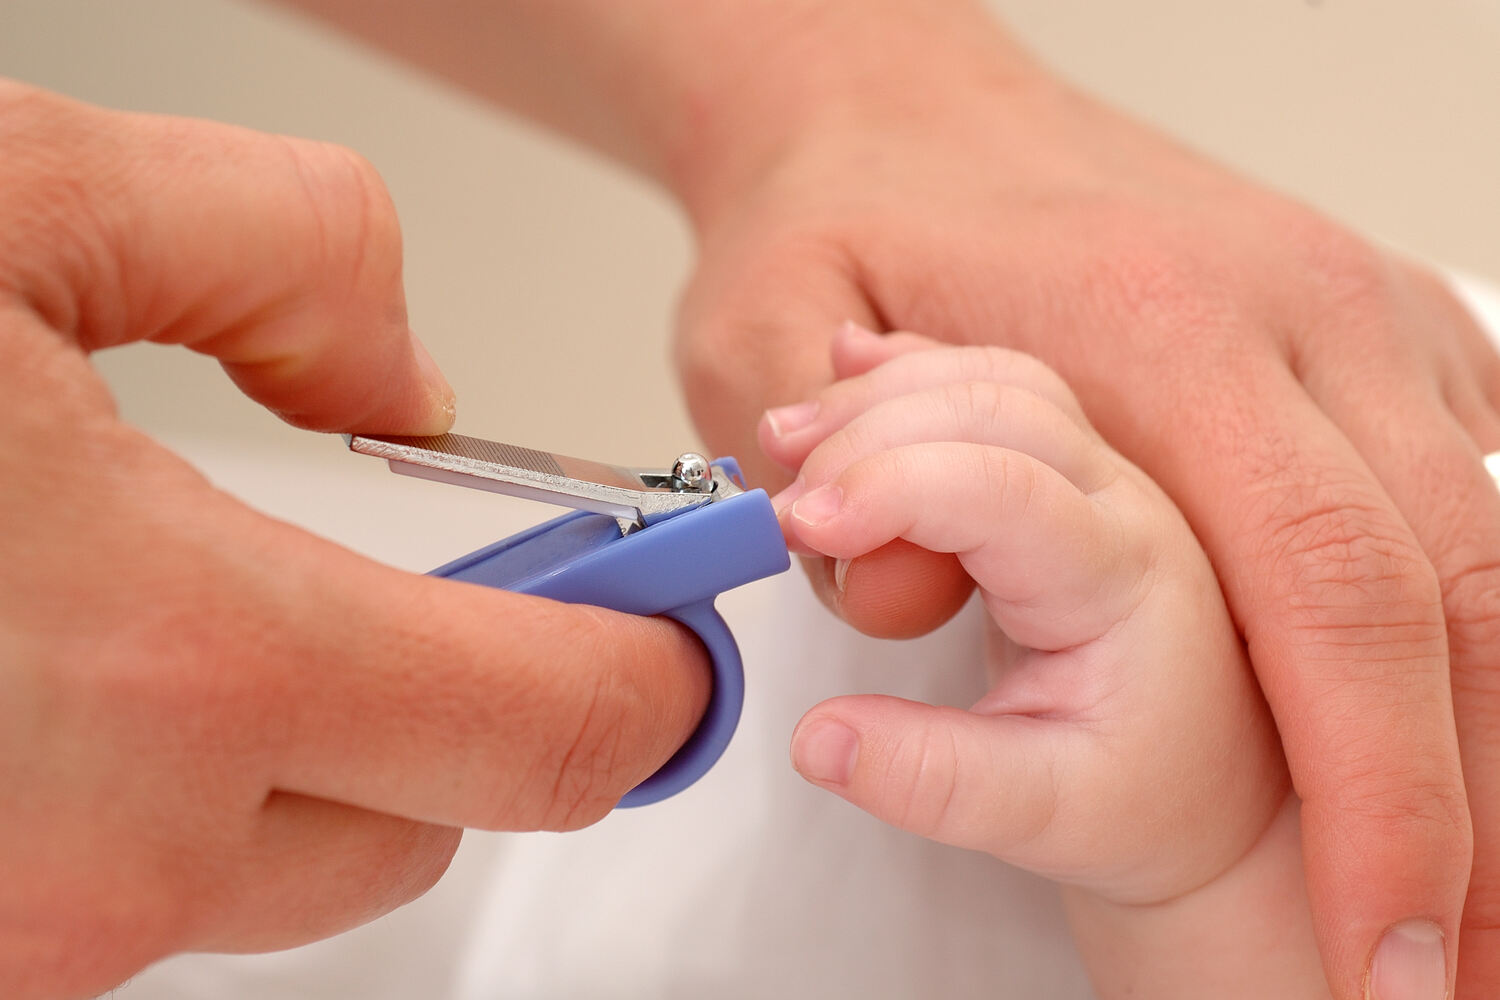 Cut your toddler's nails regularly